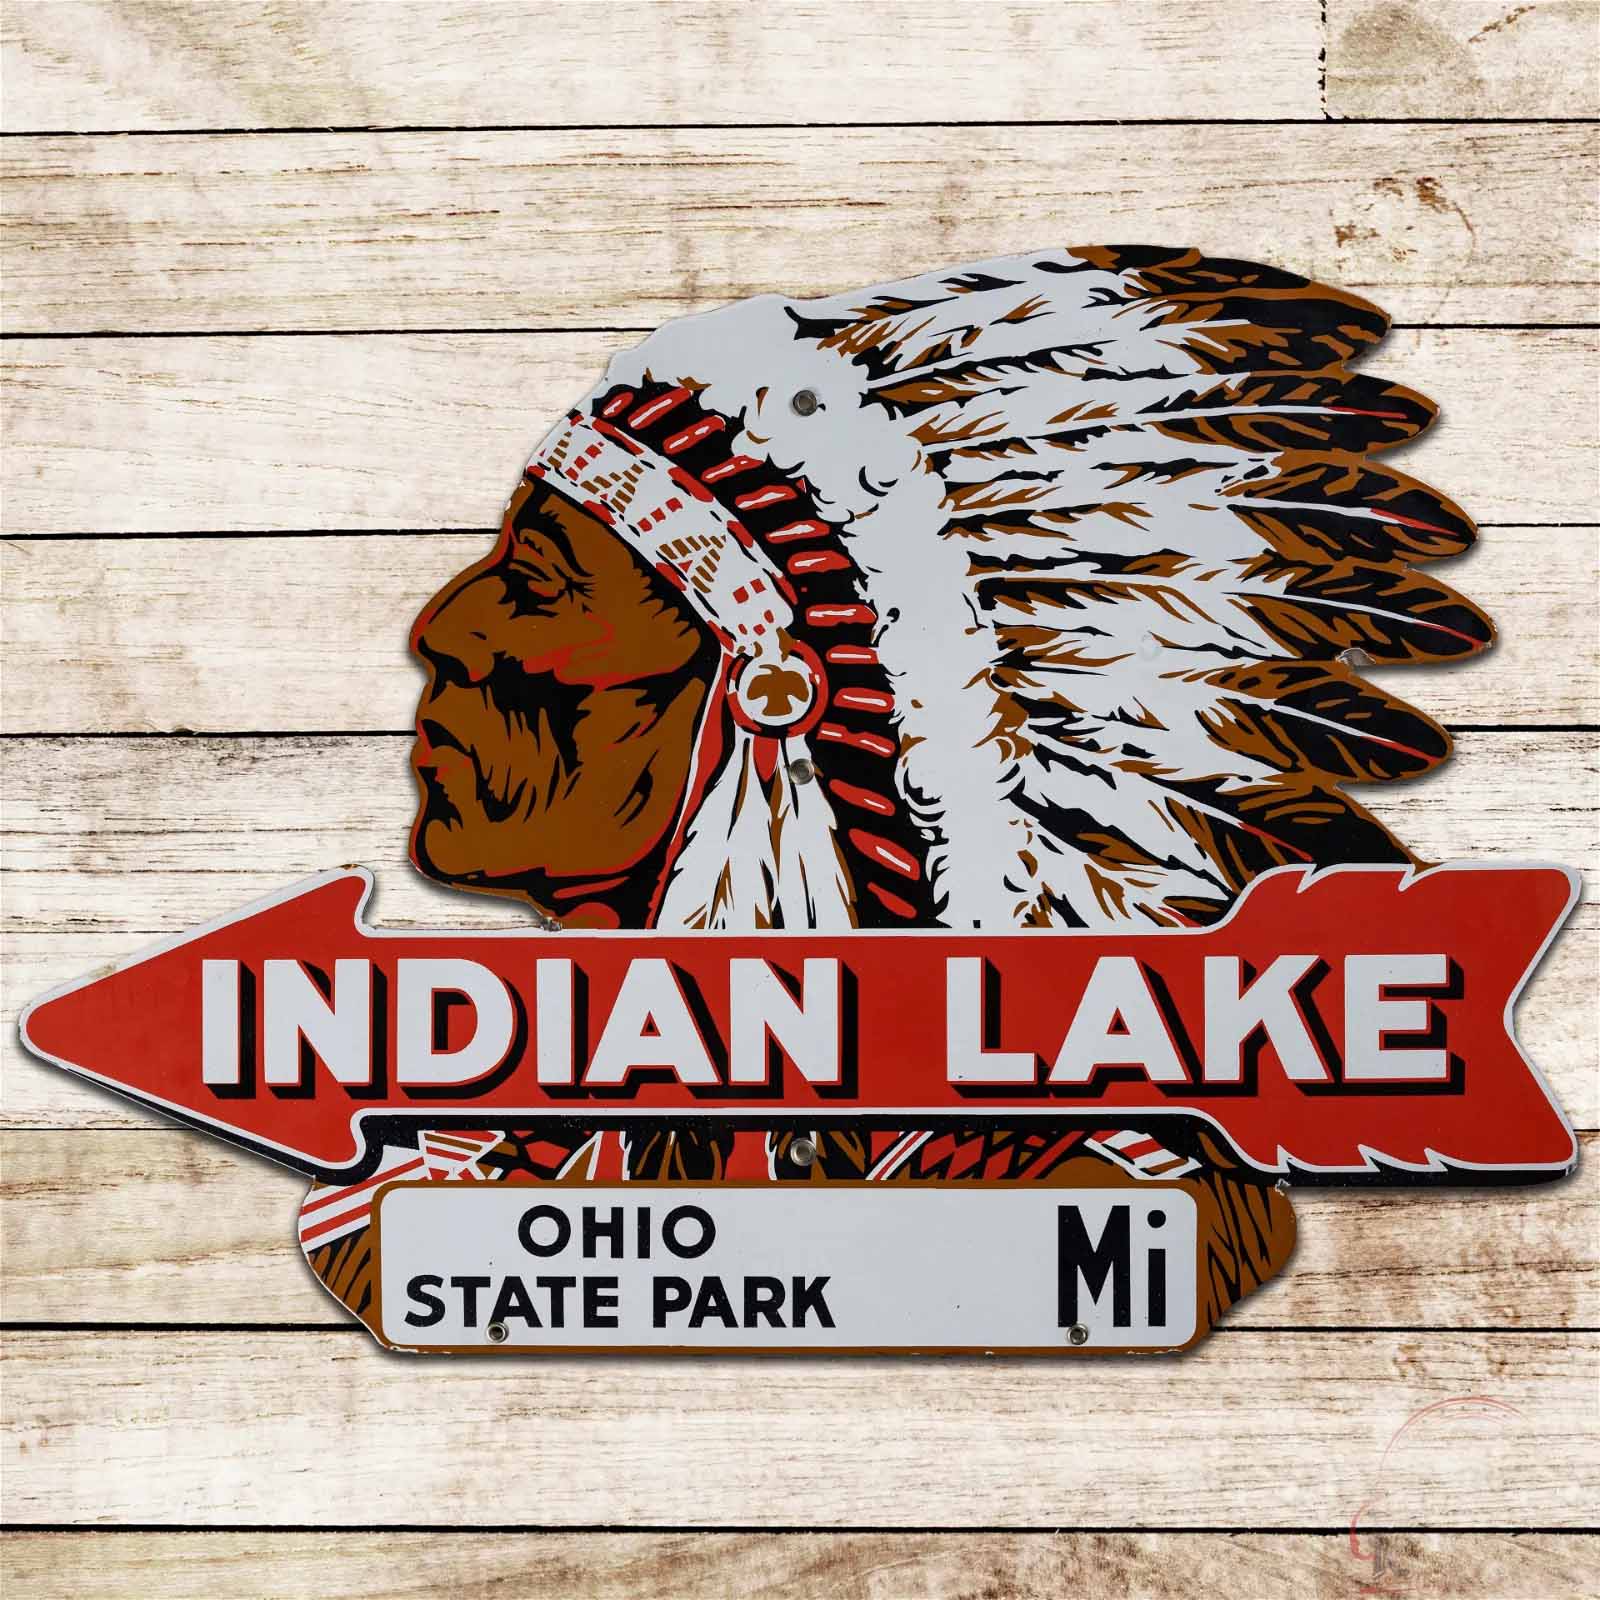 Indian Lake single-sided porcelain sign, estimated at $25-$500,000 at Richmond.